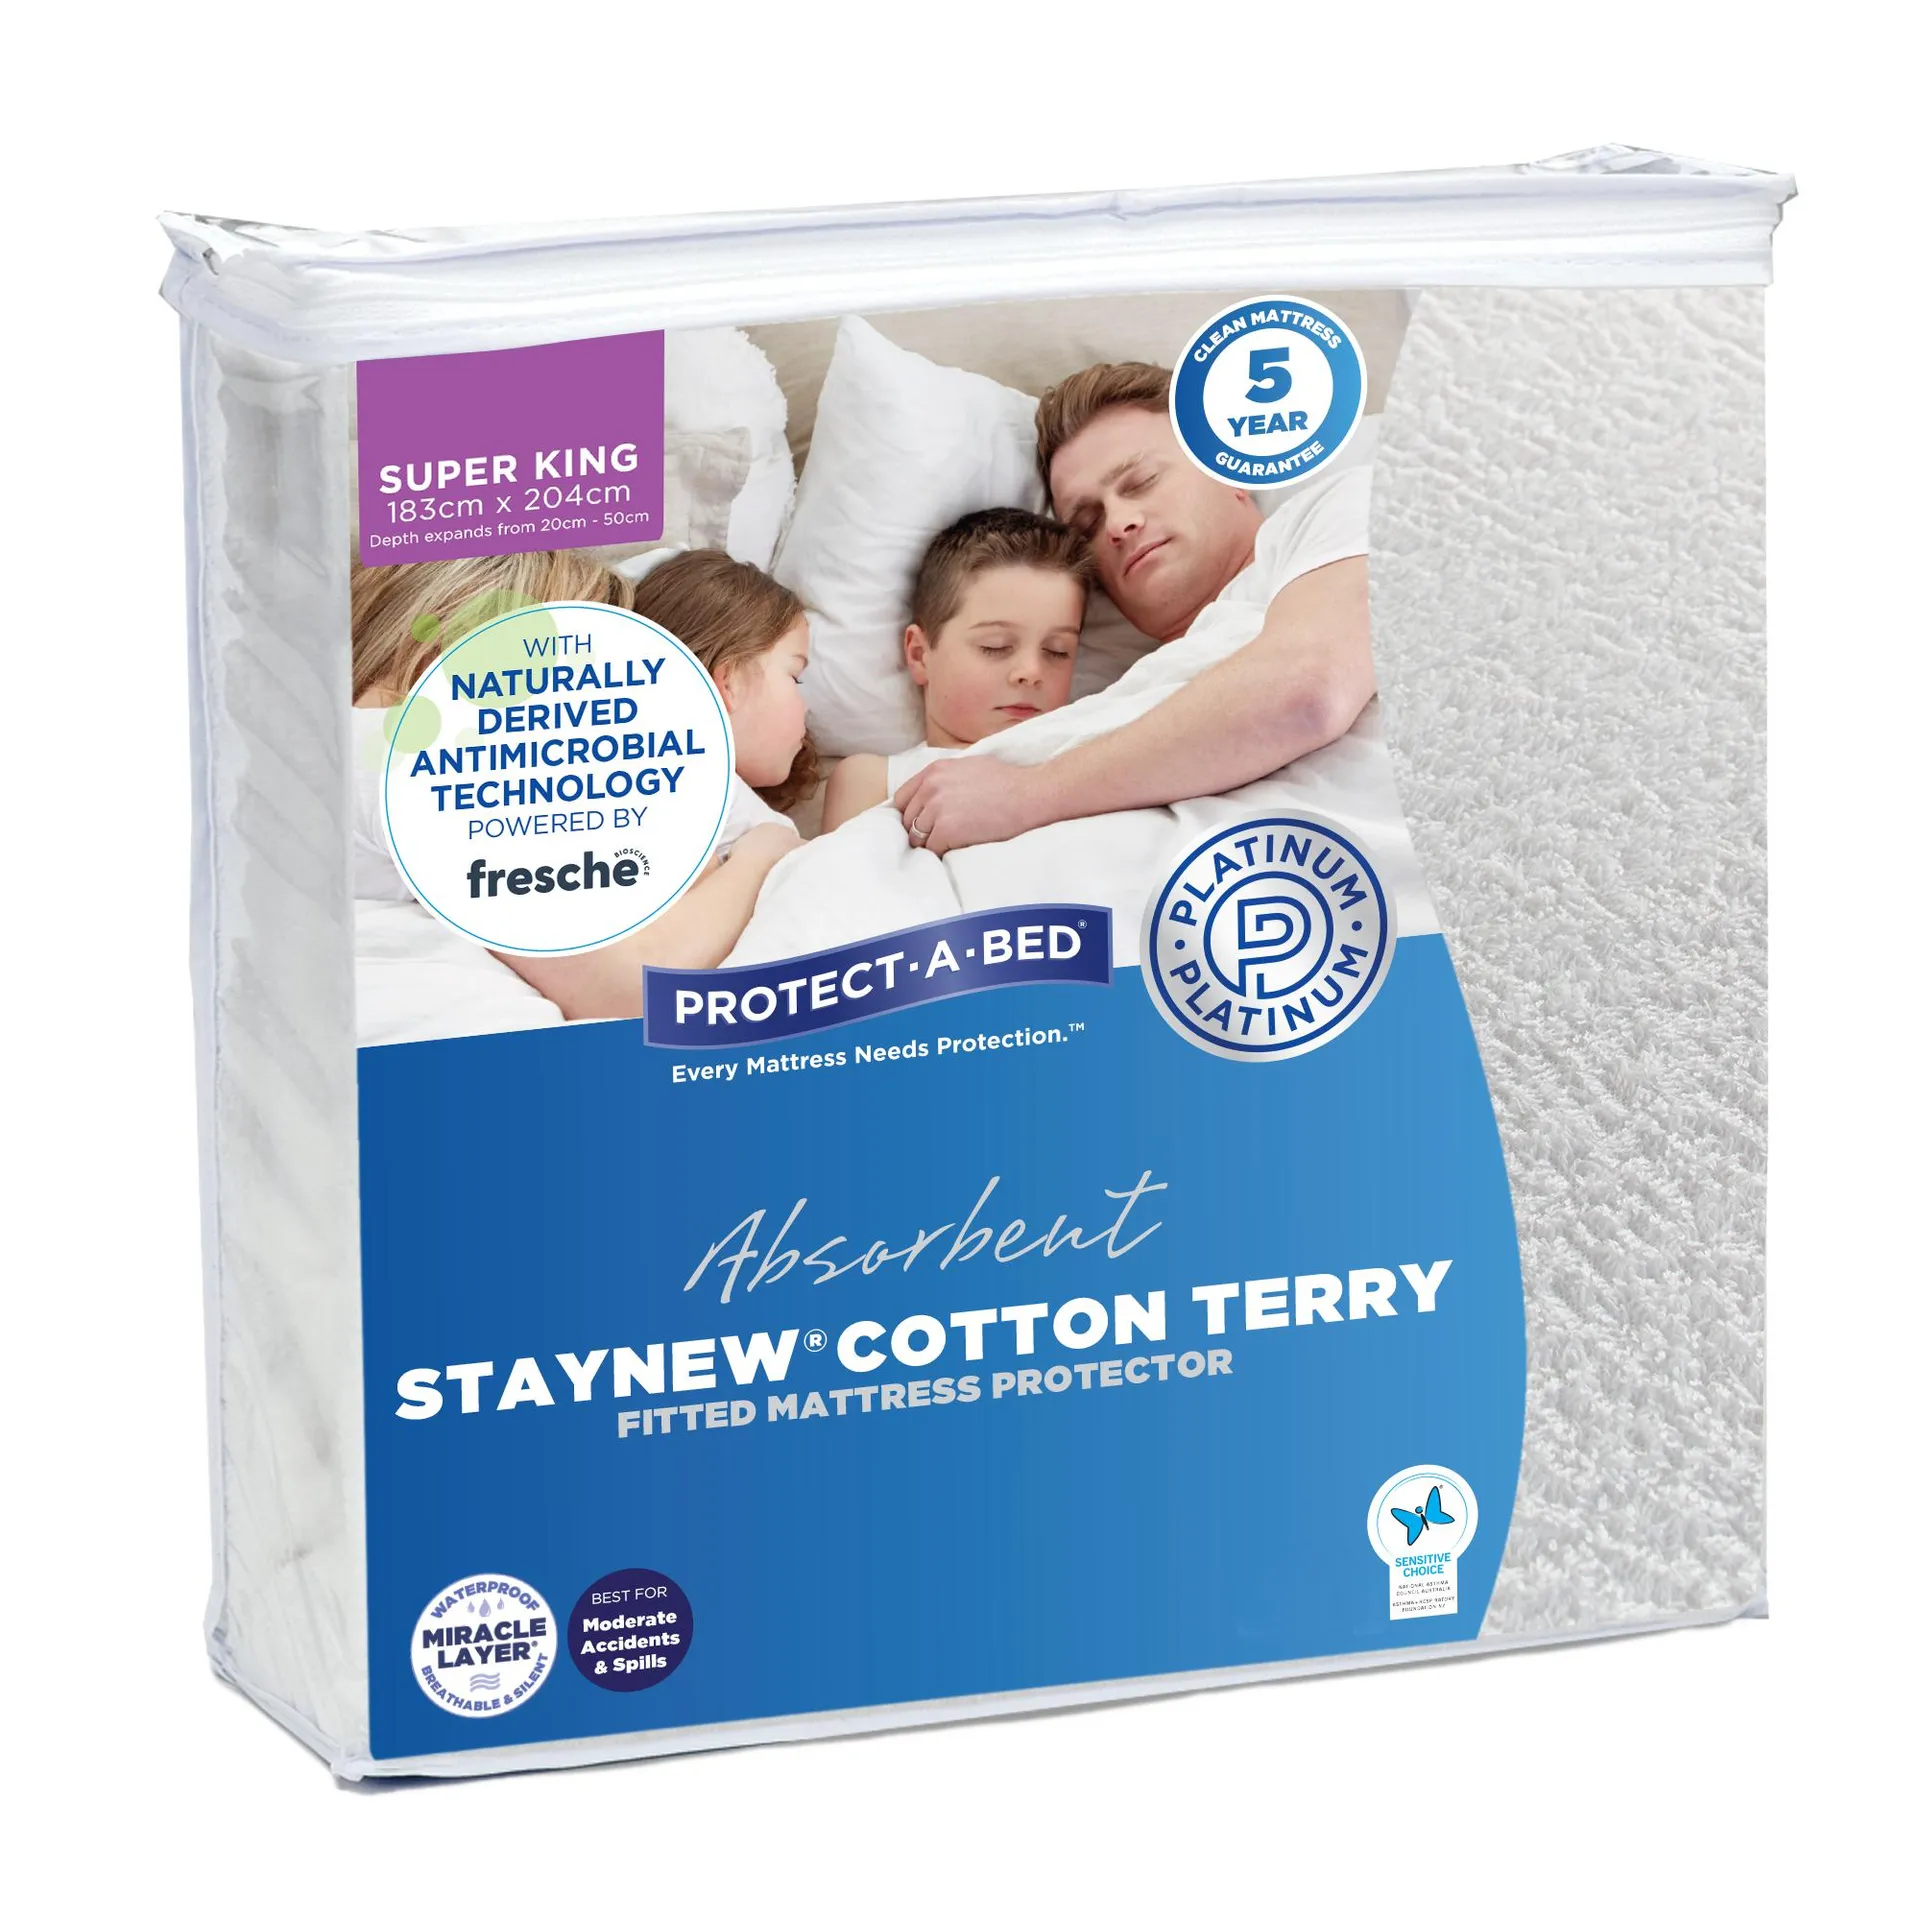 Protect-A-Bed Staynew® Cotton Terry Super King Mattress Protector